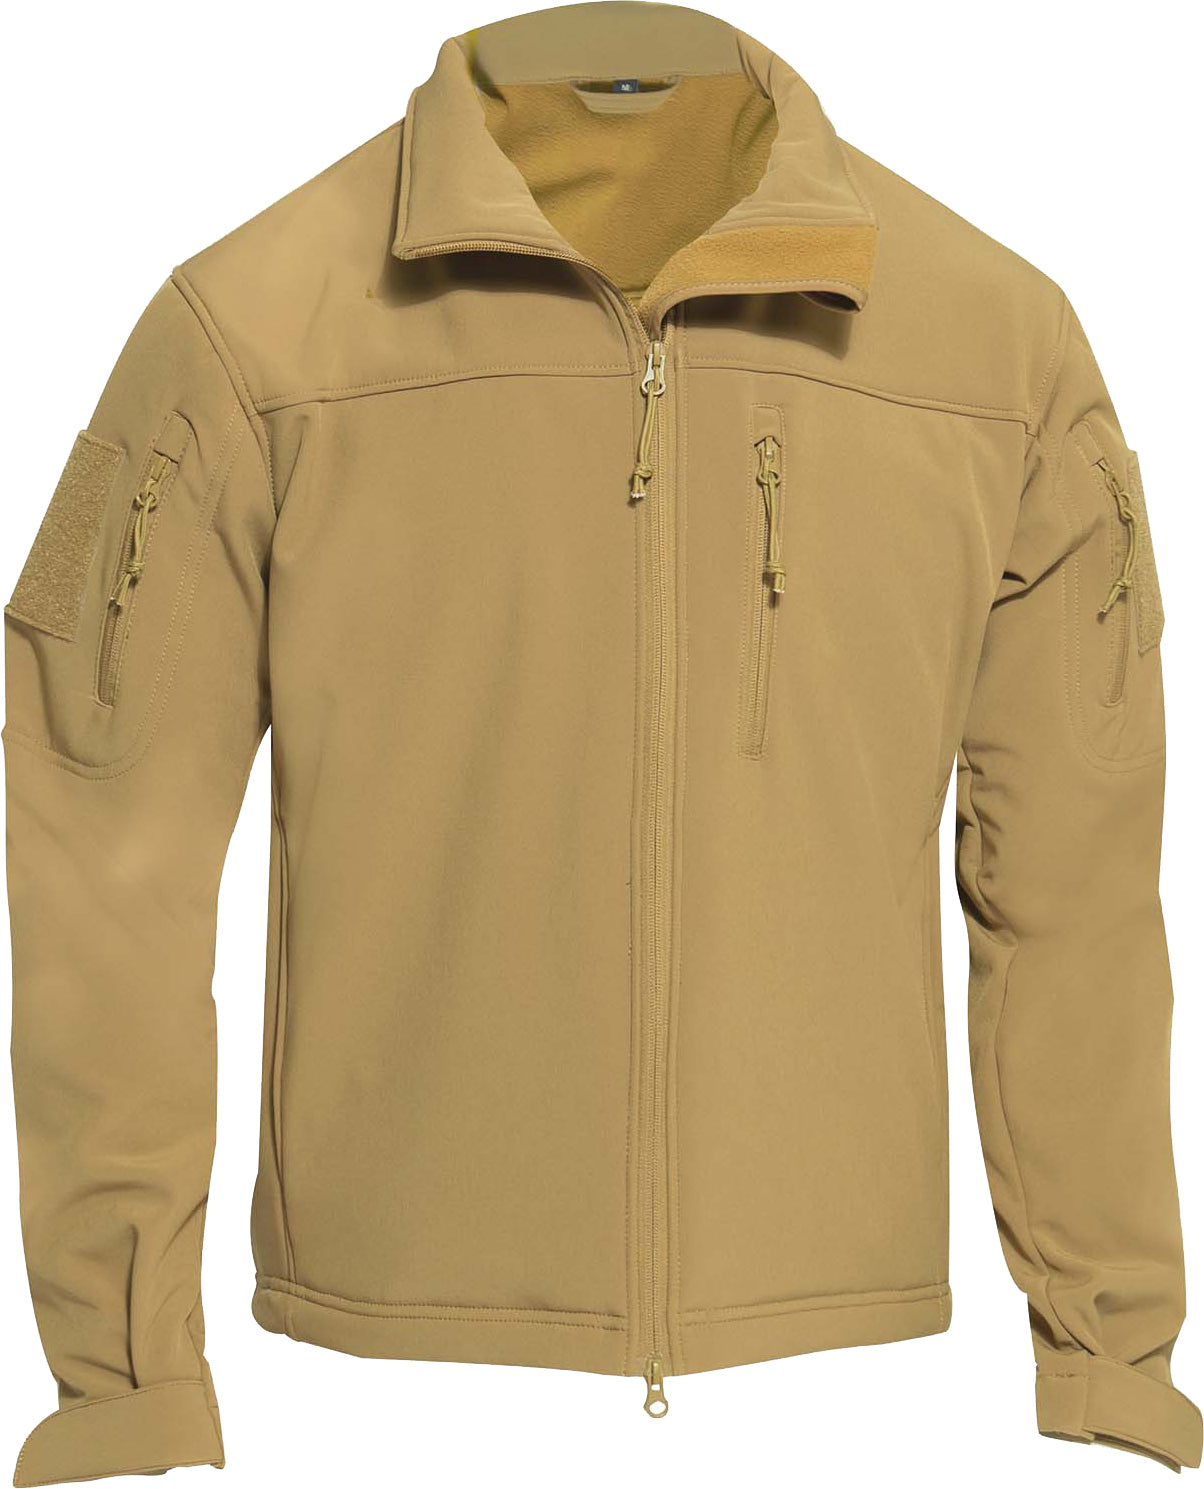 Coyote Brown Stealth Ops Soft Shell Tactical Jacket